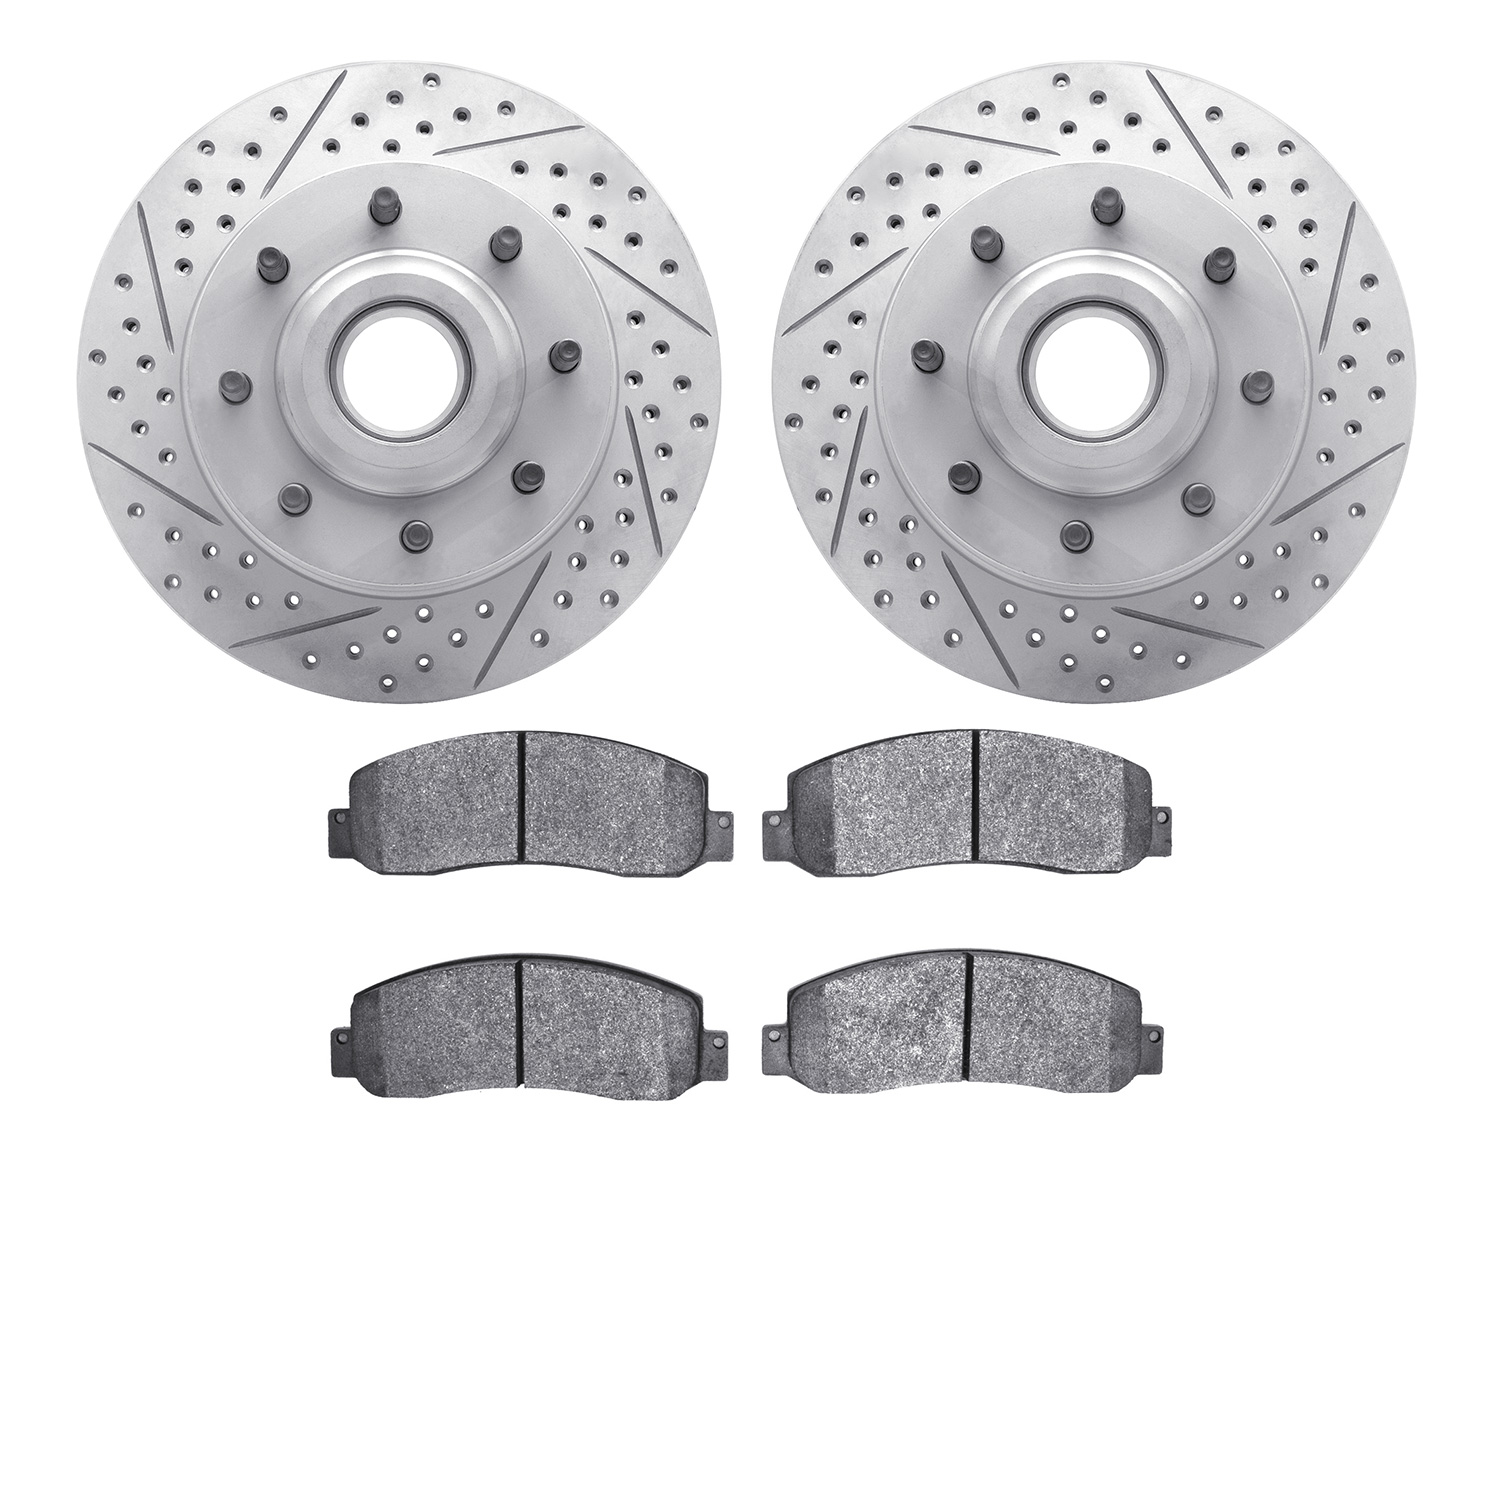 2502-54196 Geoperformance Drilled/Slotted Rotors w/5000 Advanced Brake Pads Kit, 2006-2012 Ford/Lincoln/Mercury/Mazda, Position: